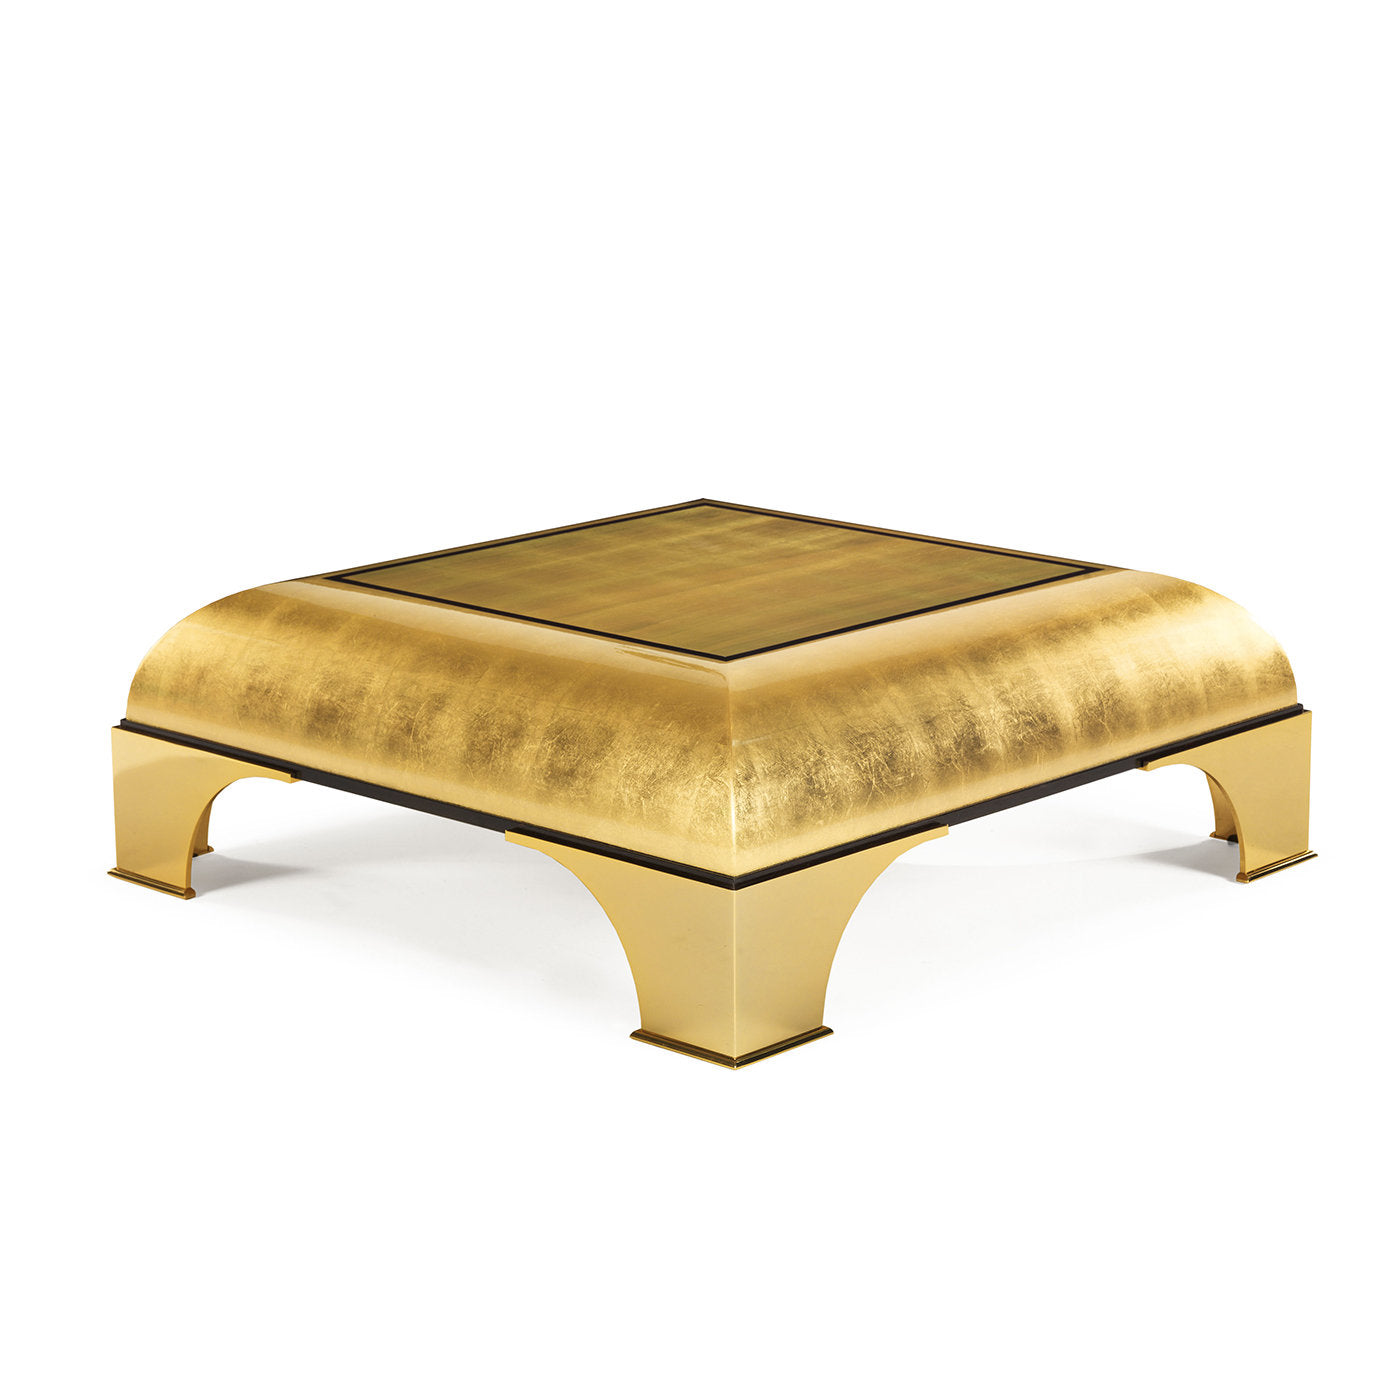 T138 Coffee Table With Golf Leaf - Alternative view 1